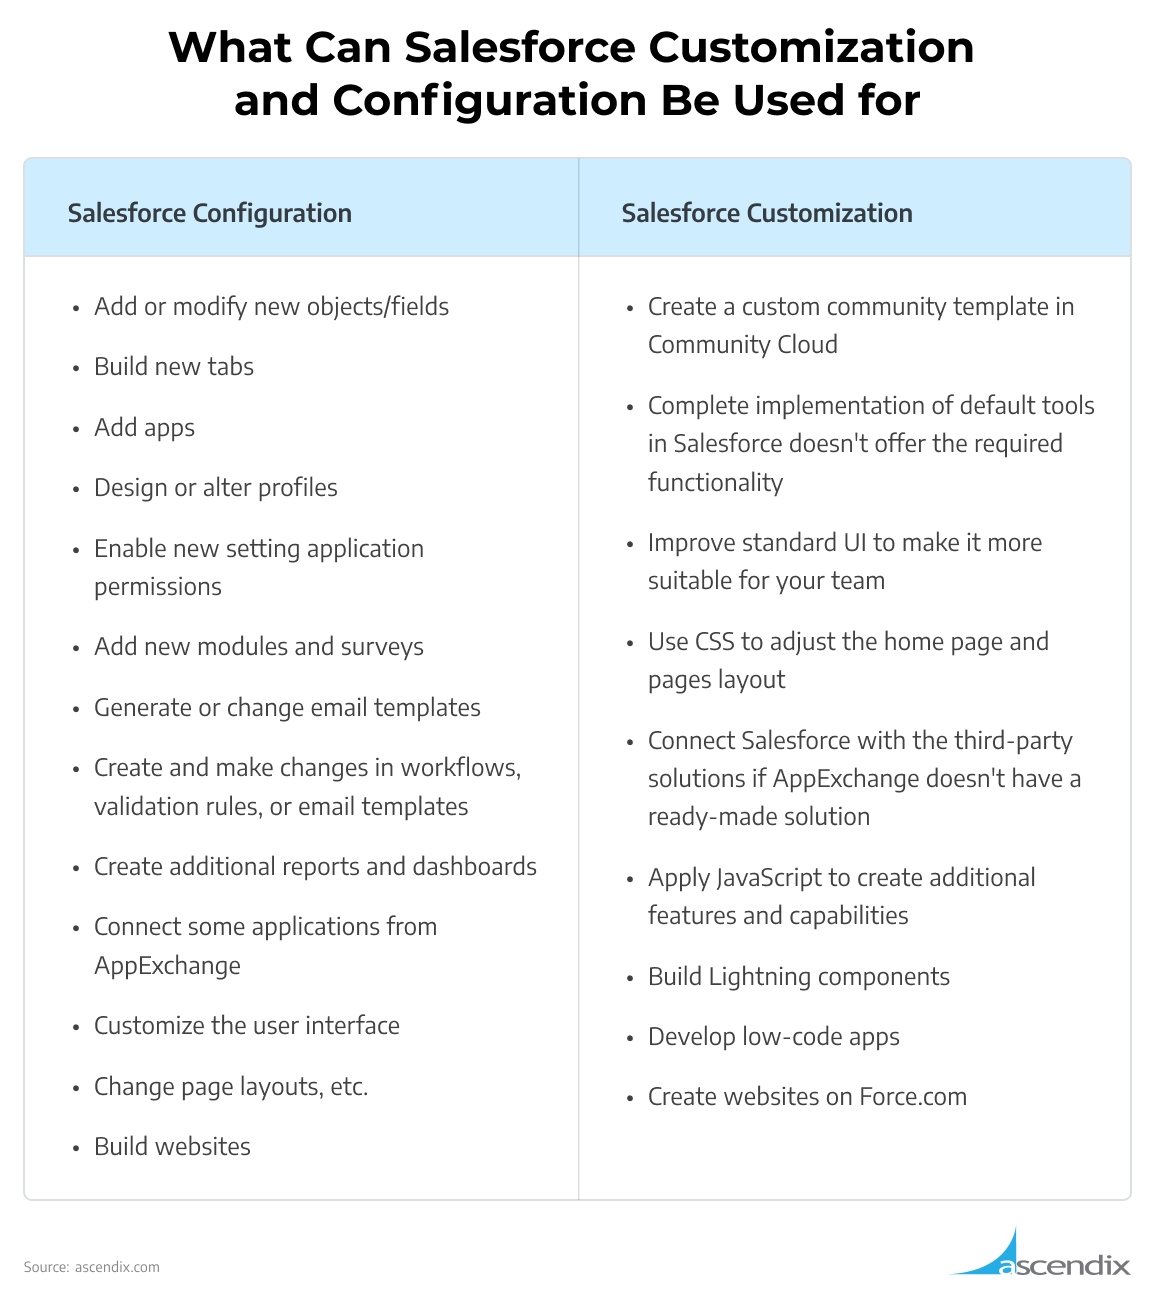 What Can Salesforce Customization and Configuration Be Used for | Ascendix